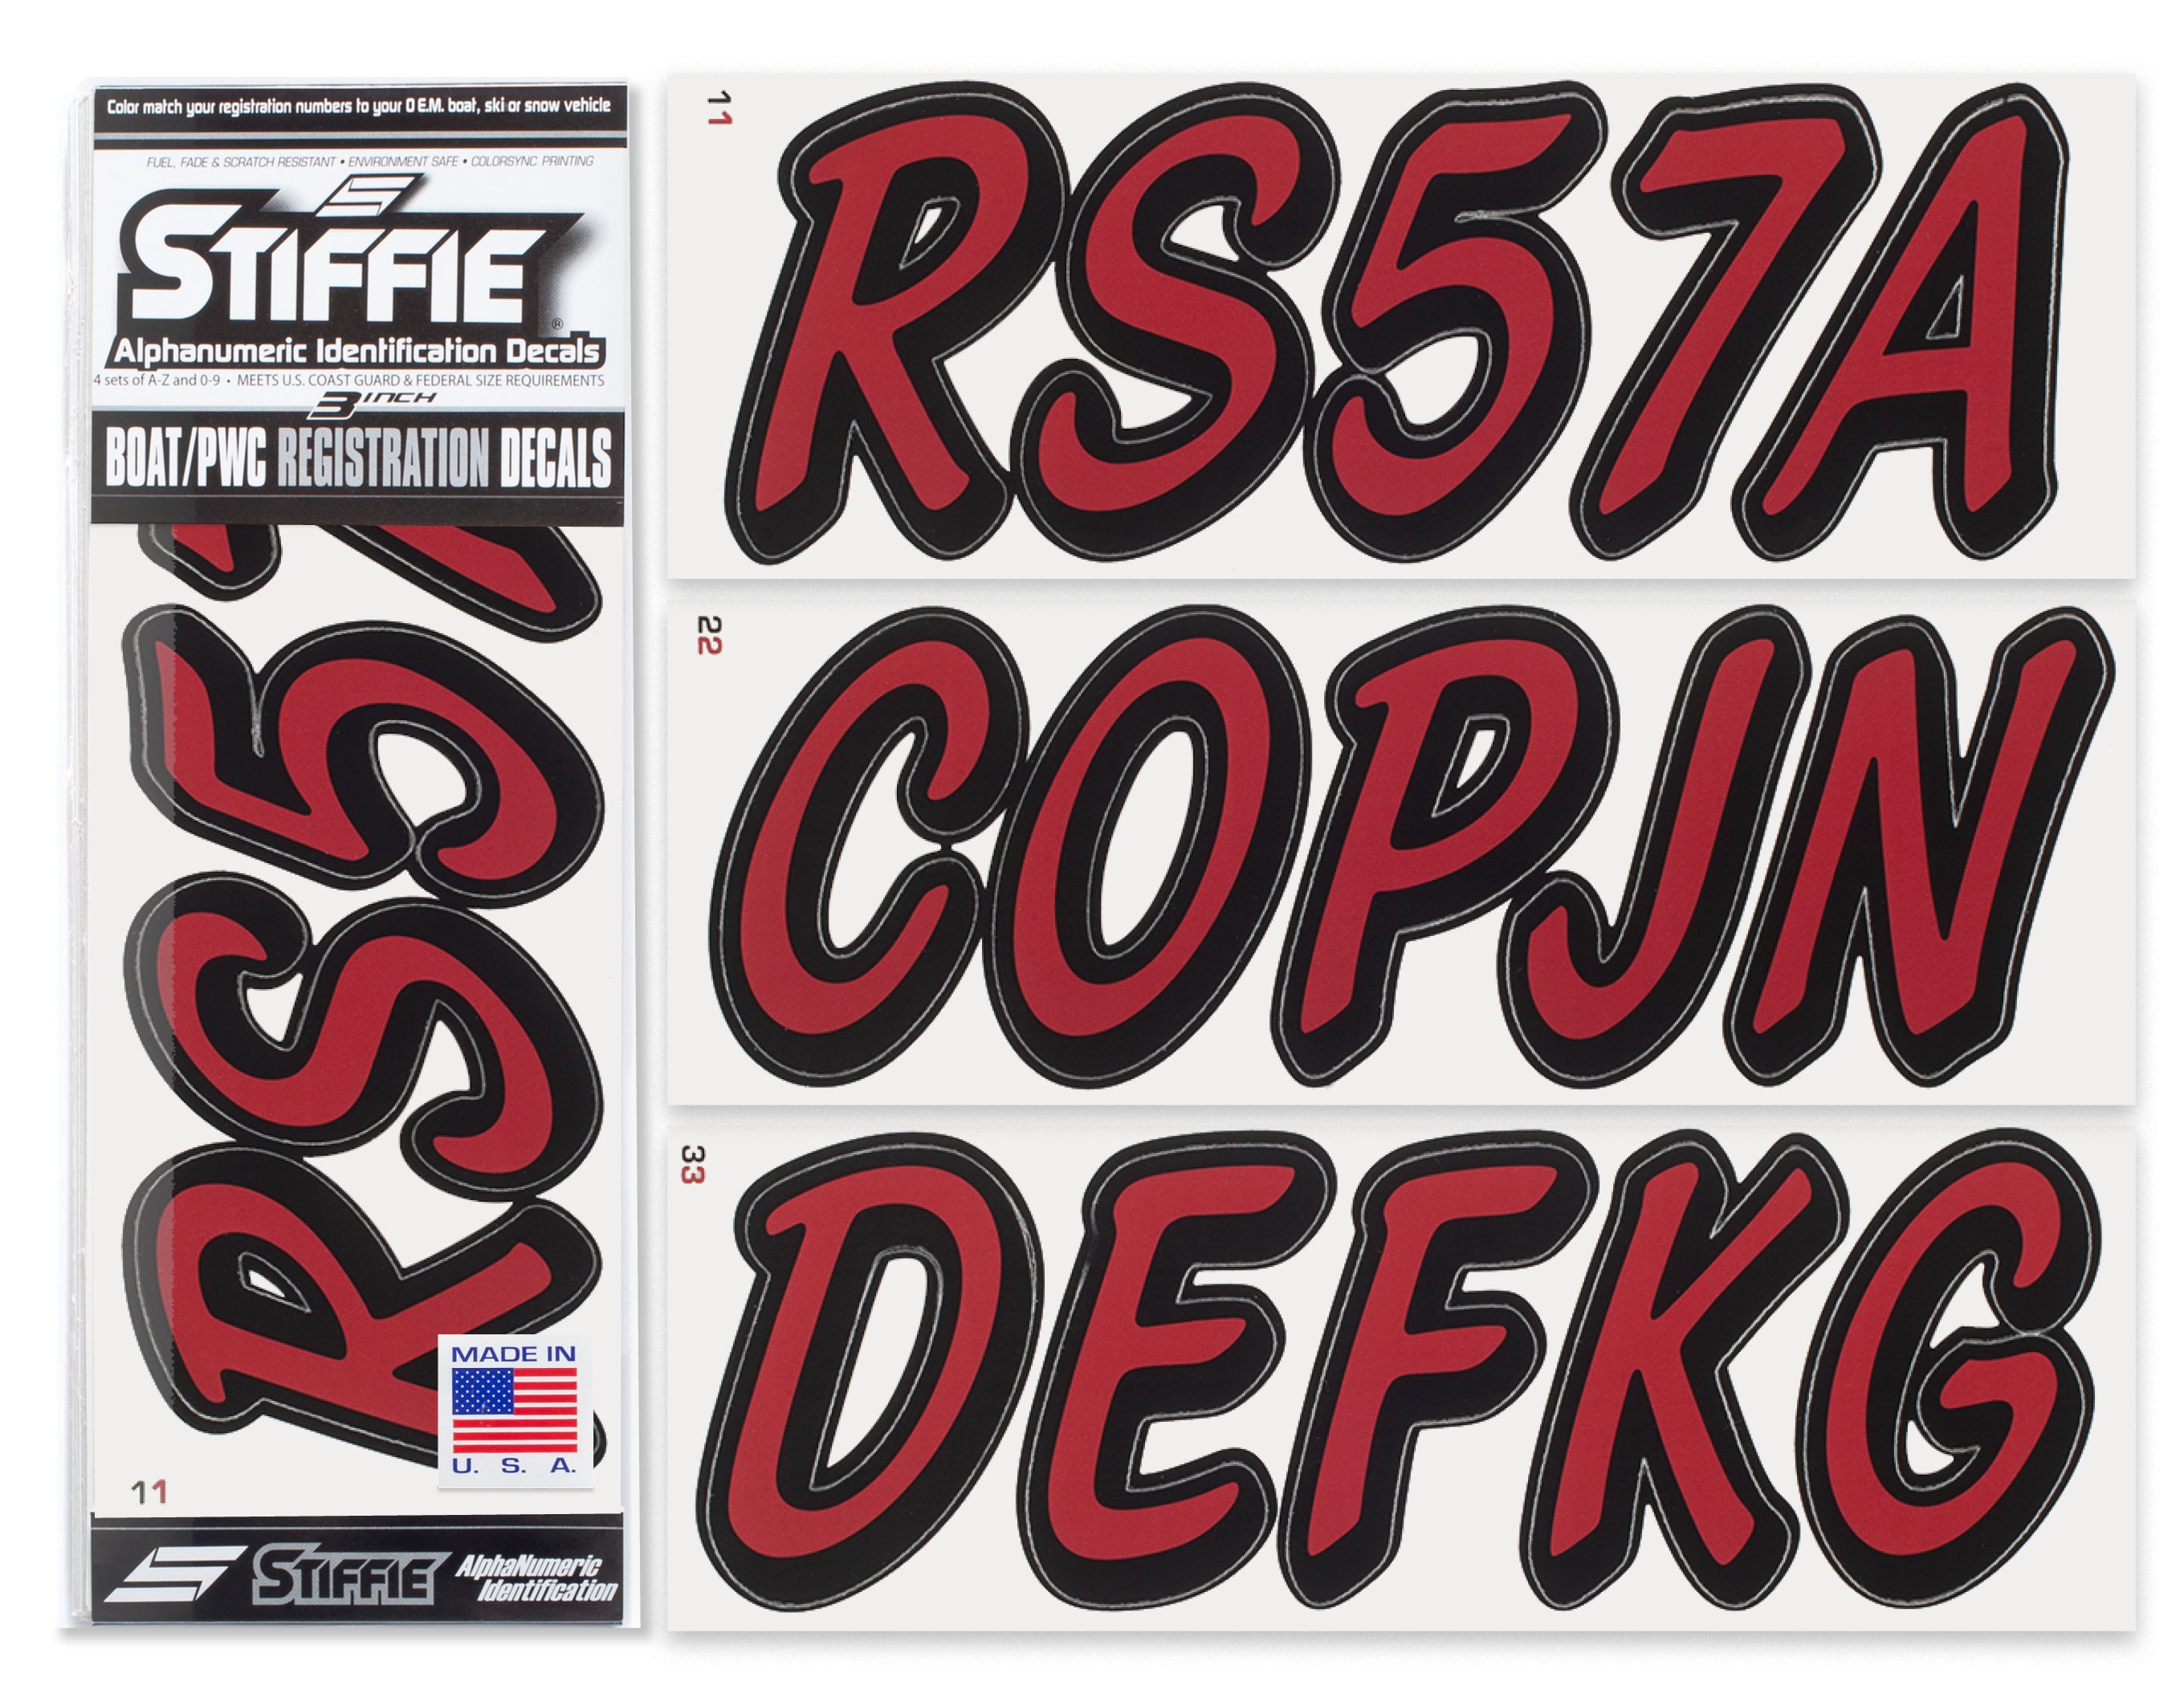 STIFFIE Whipline Solid Burgundy/Black 3" Alpha-Numeric Registration Identification Numbers Stickers Decals for Boats & Personal Watercraft